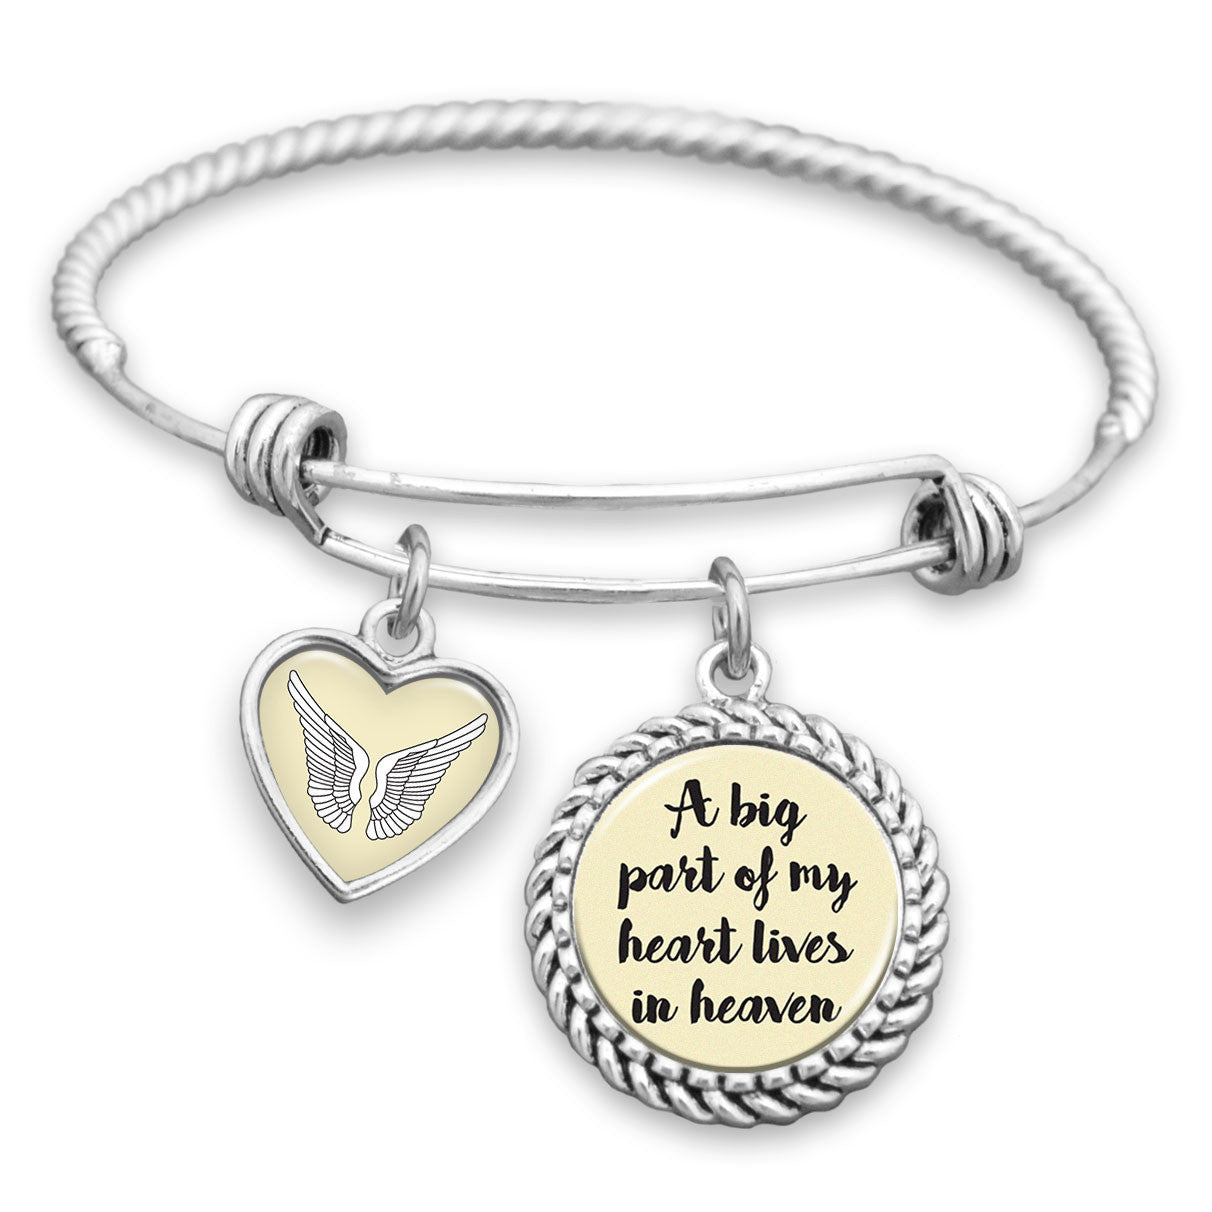 A Big Part Of My Heart Lives In Heaven Charm Bracelet